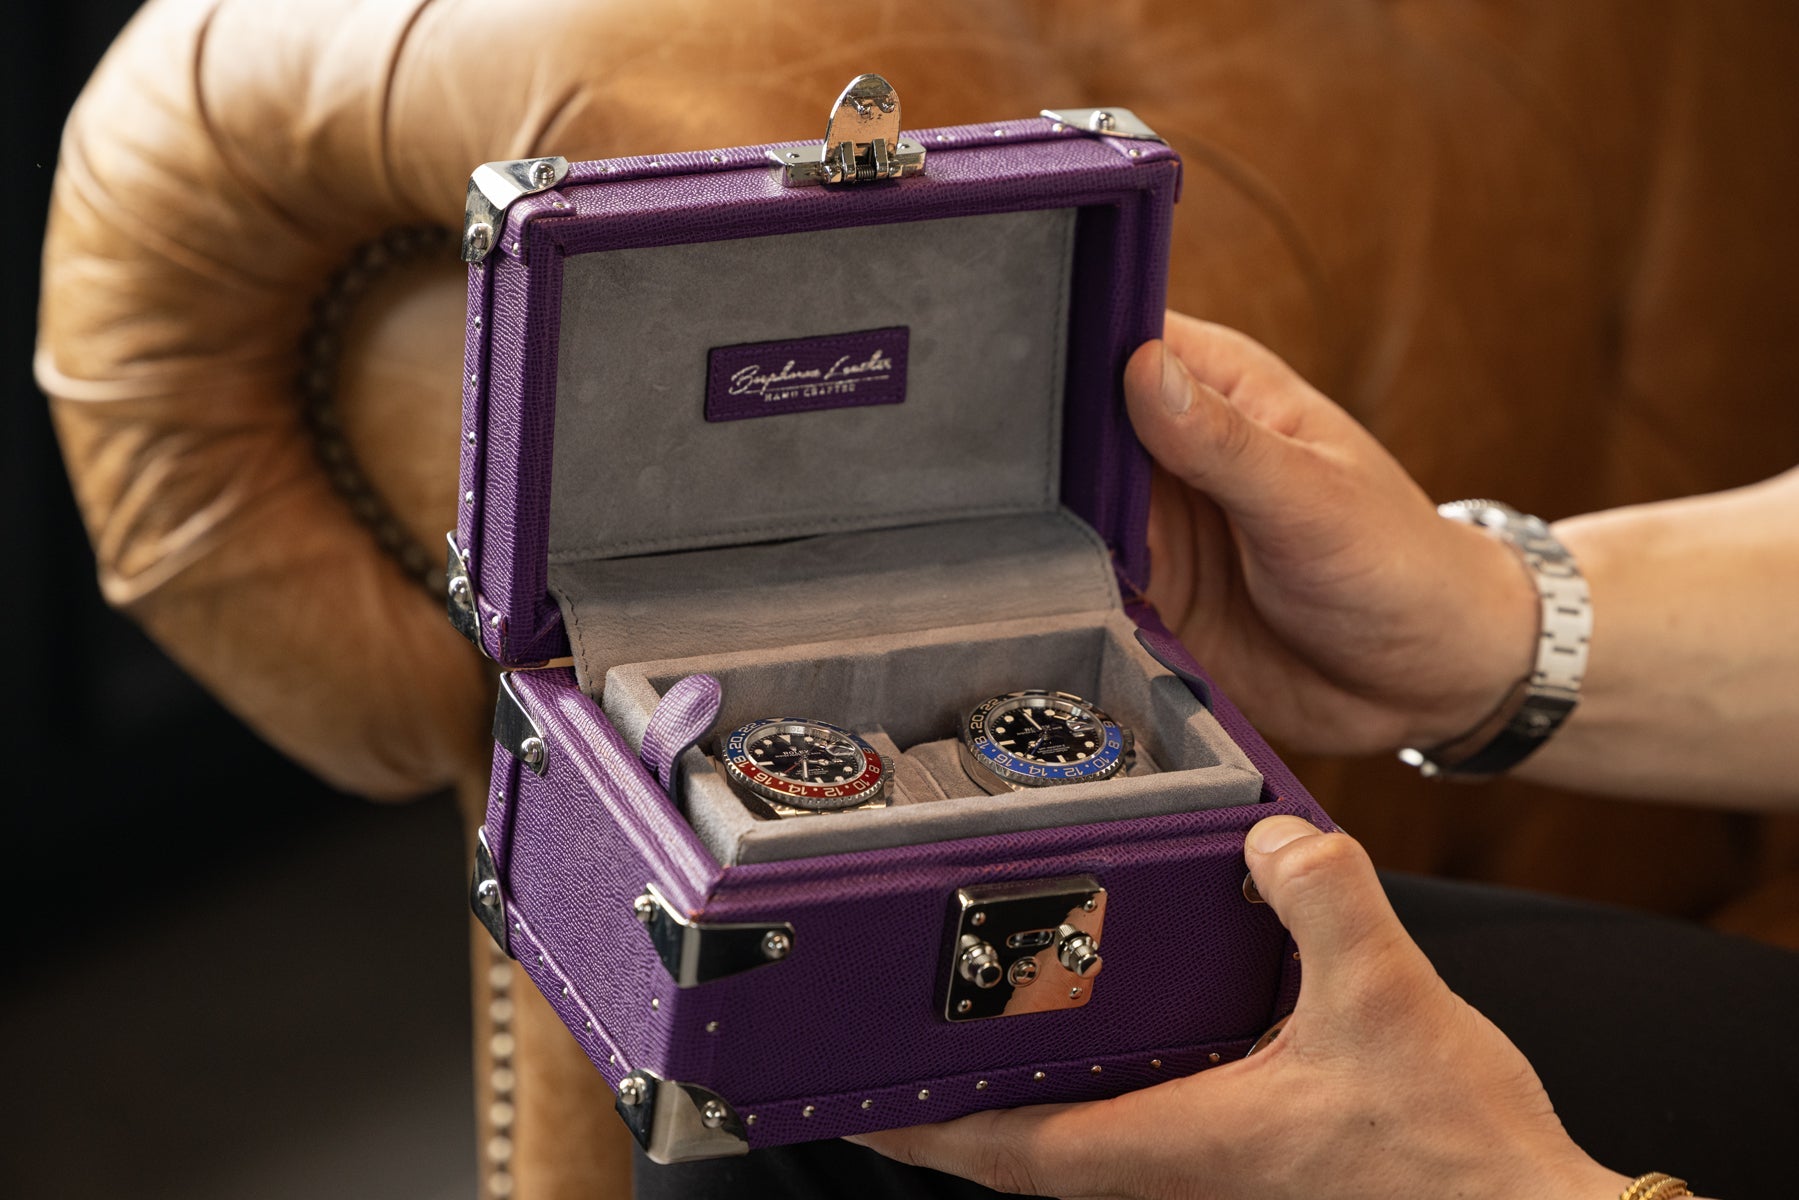 Bosphorus LeatherPetra Watch Case - Saffiano Purple For 2 Watches